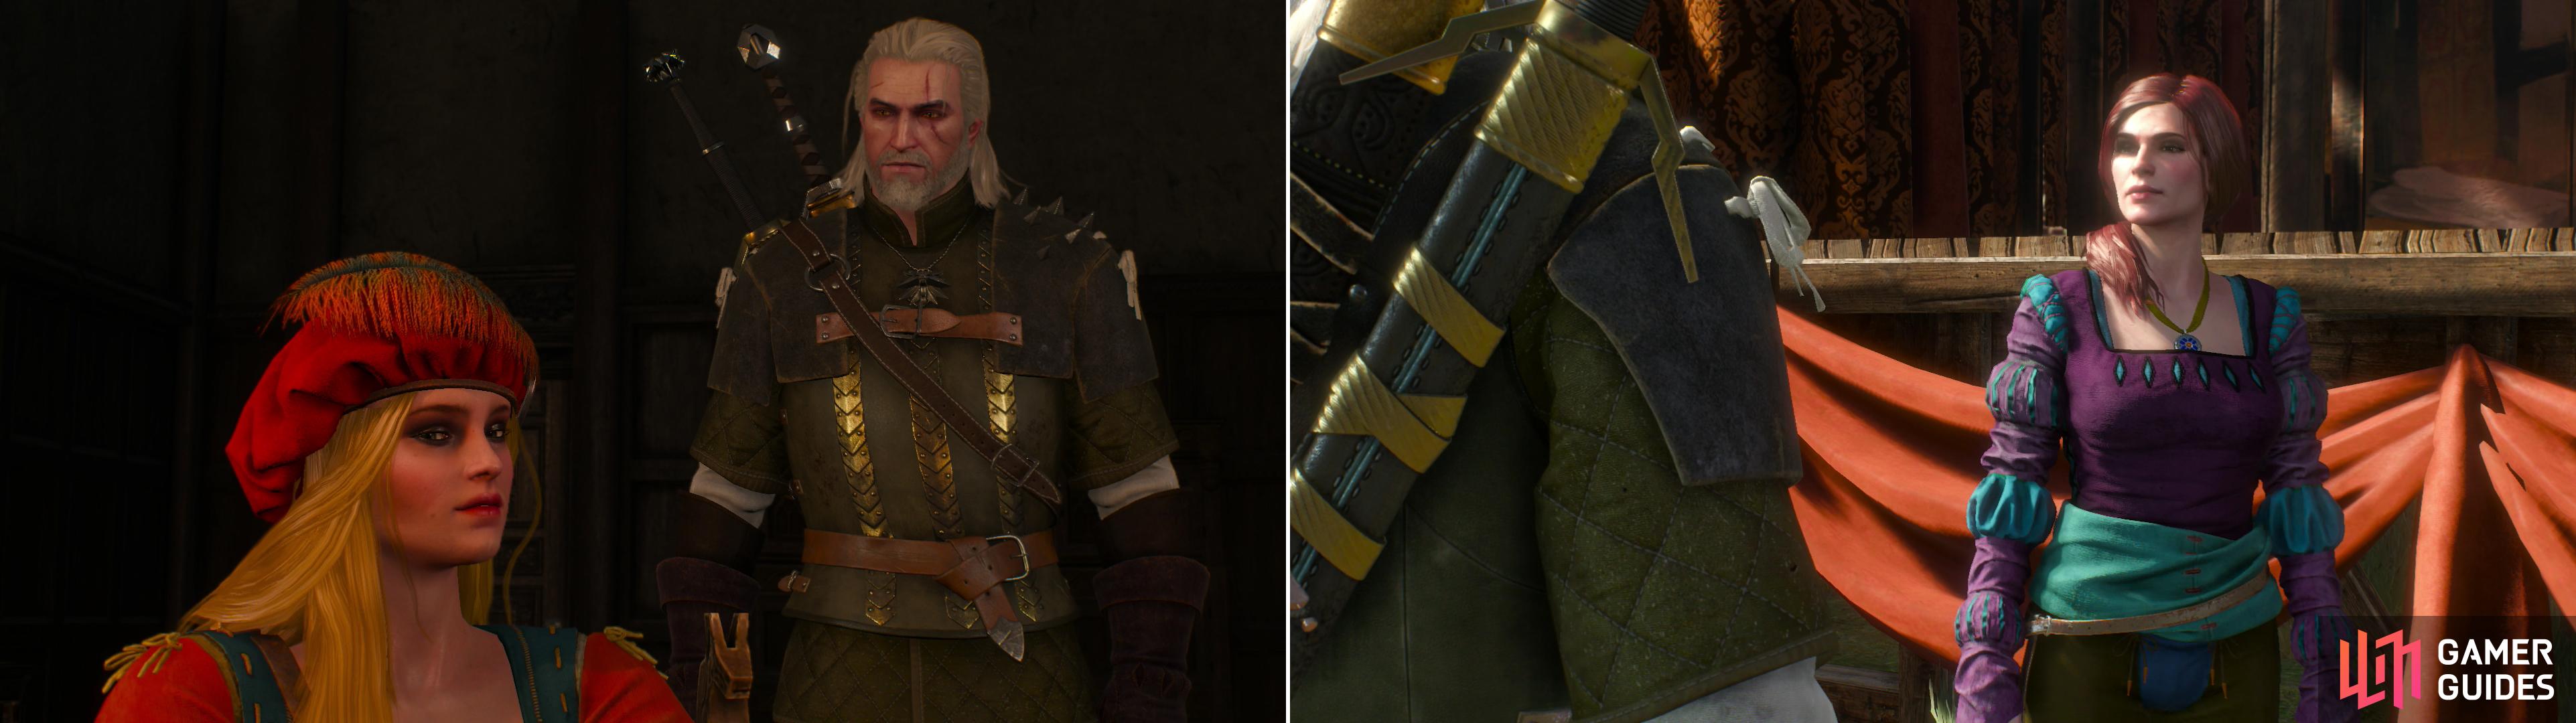 Geralt “helps” Priscilla write a play (left) then heads off to hire Irina’s acting troupe (right).